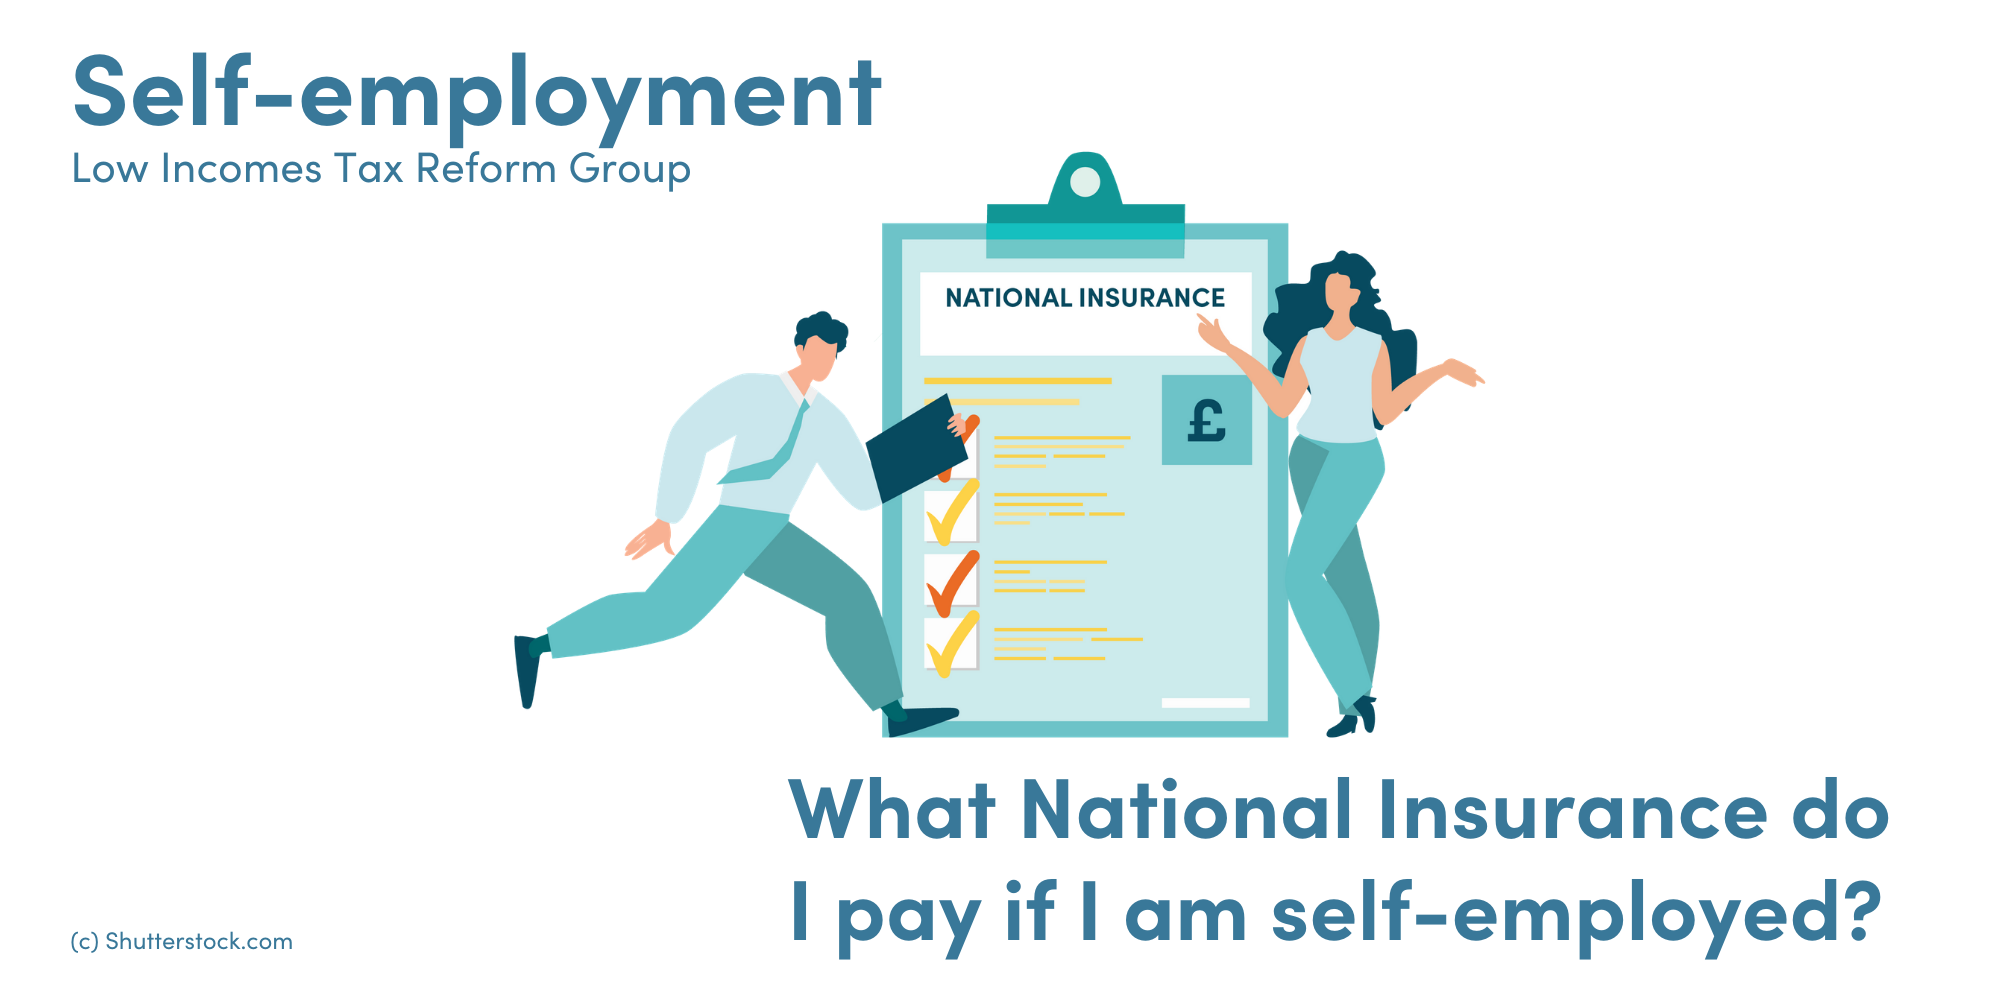 Tomar un baño alumno pasos What National Insurance do I pay if I am self-employed? | Low Incomes Tax  Reform Group